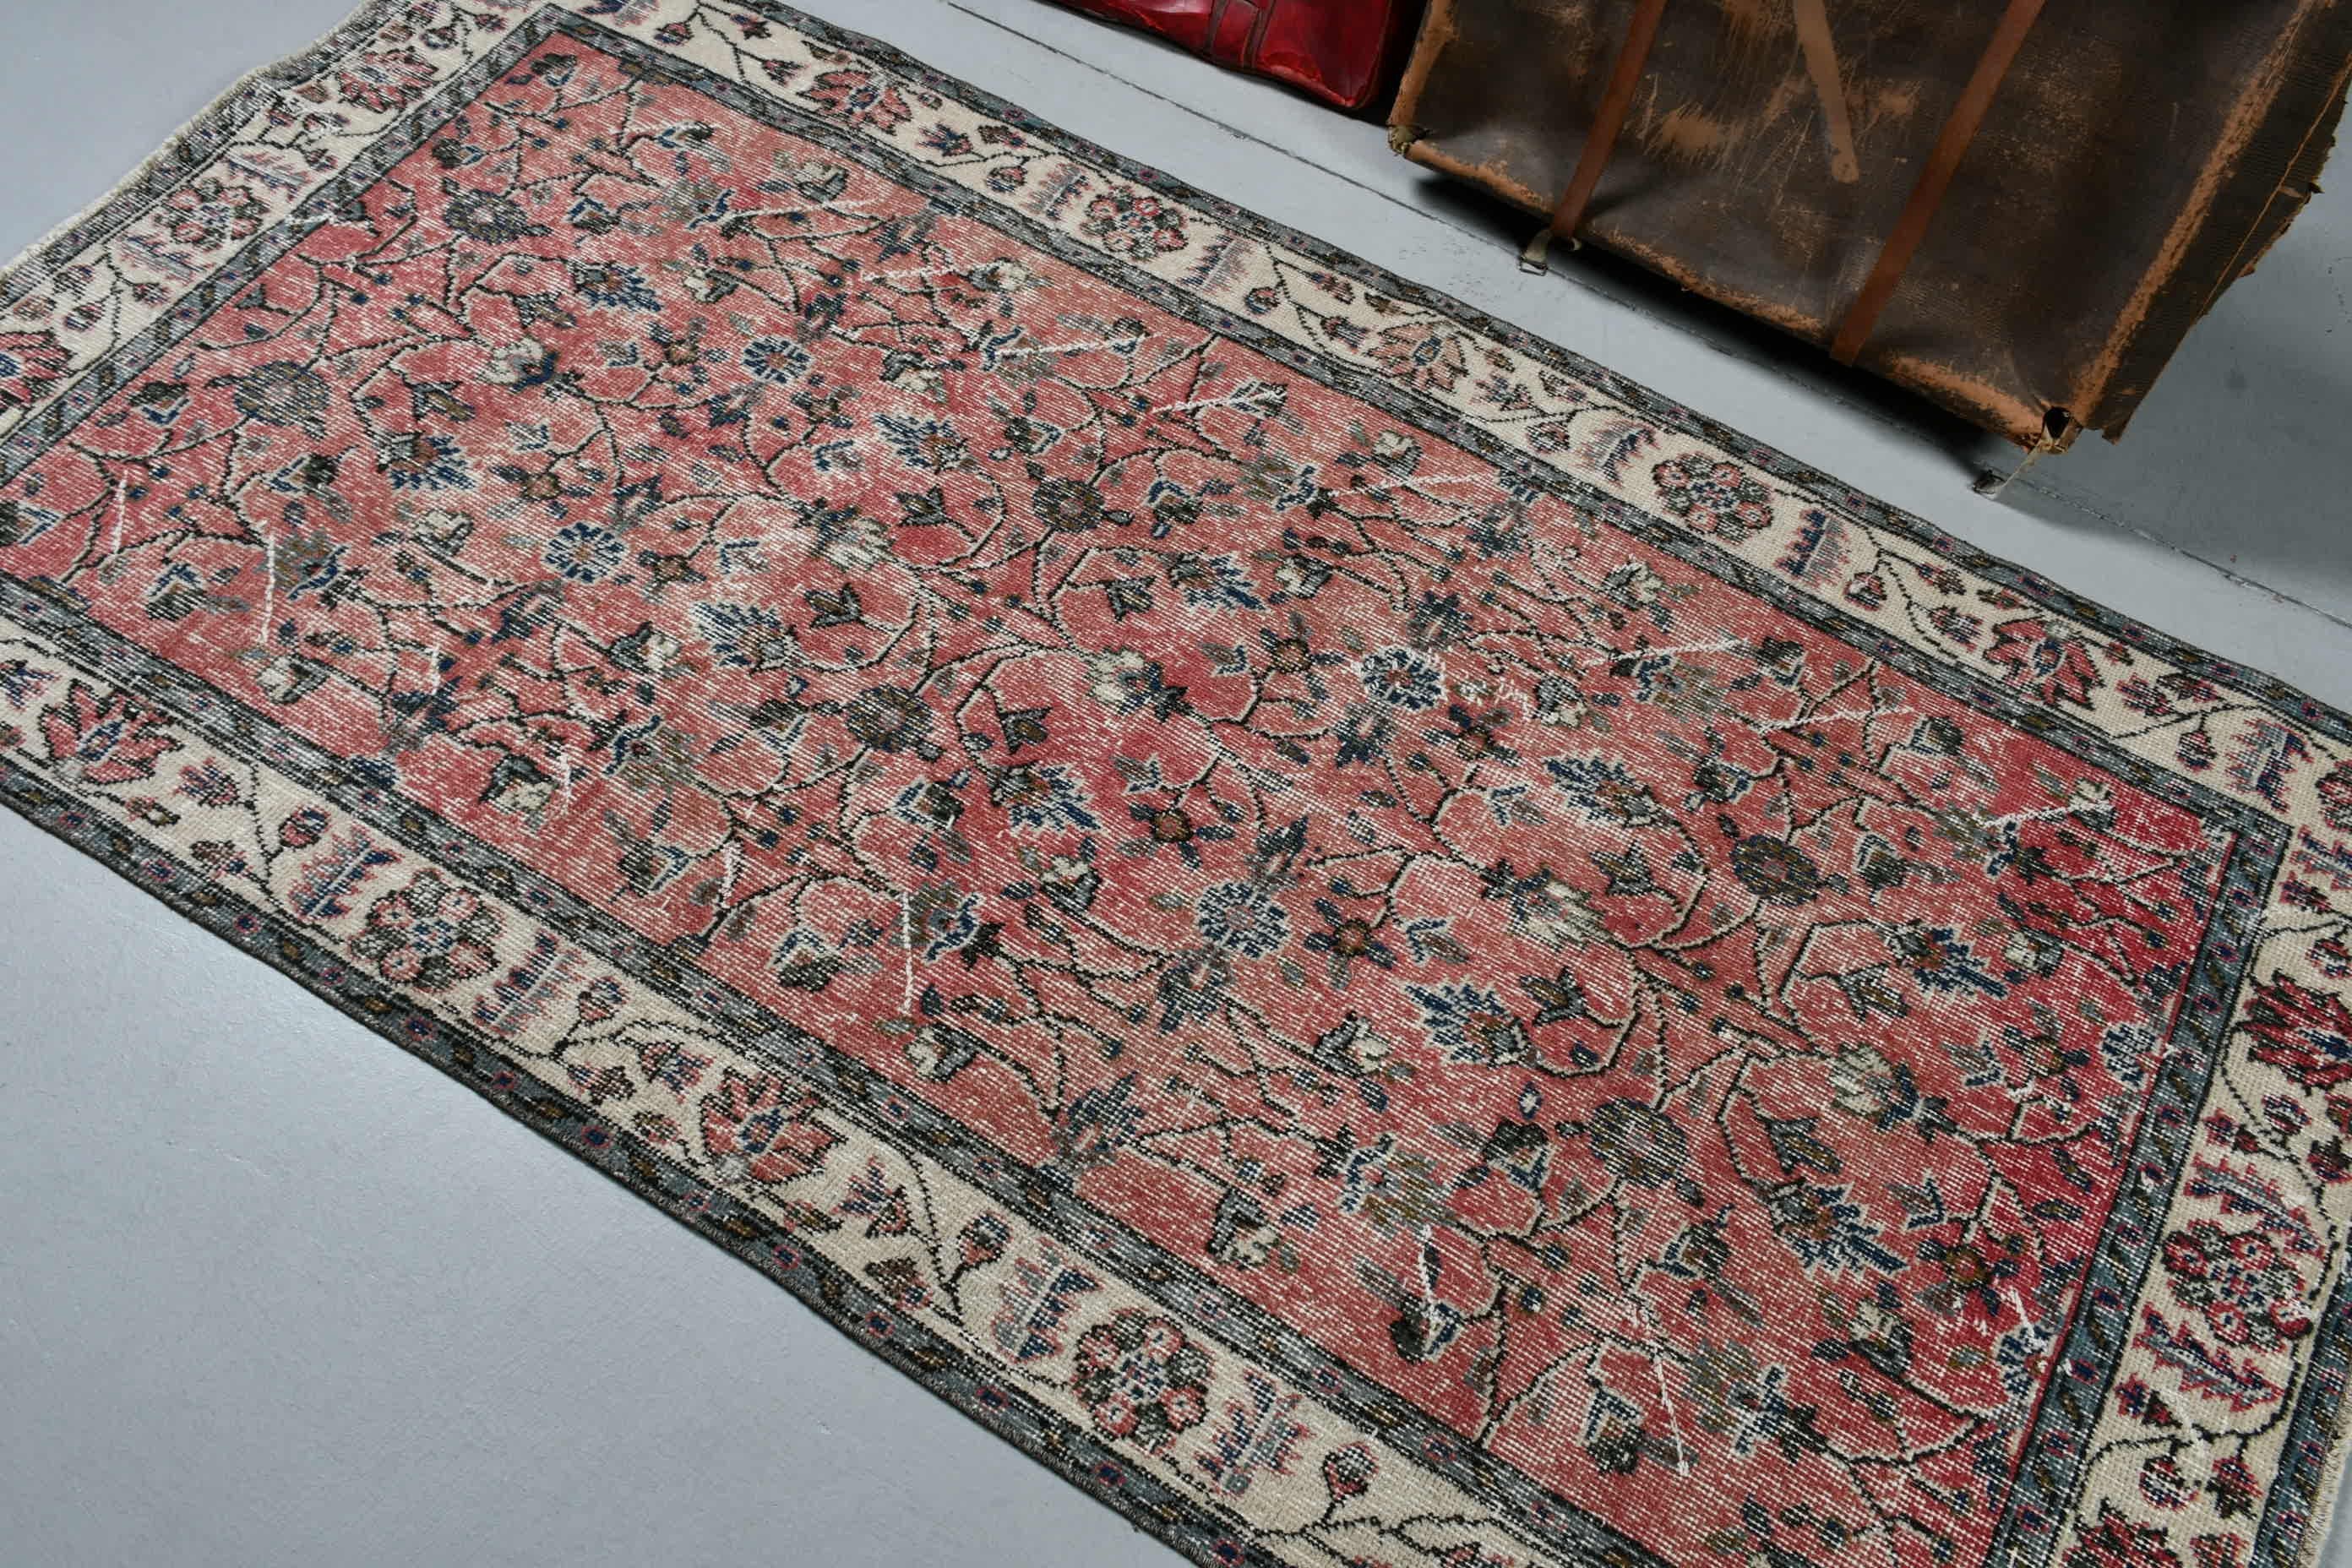 Dining Room Rug, Red  3.6x6.9 ft Area Rugs, Kitchen Rug, Moroccan Rug, Turkish Rugs, Handwoven Rug, Oushak Rug, Vintage Rugs